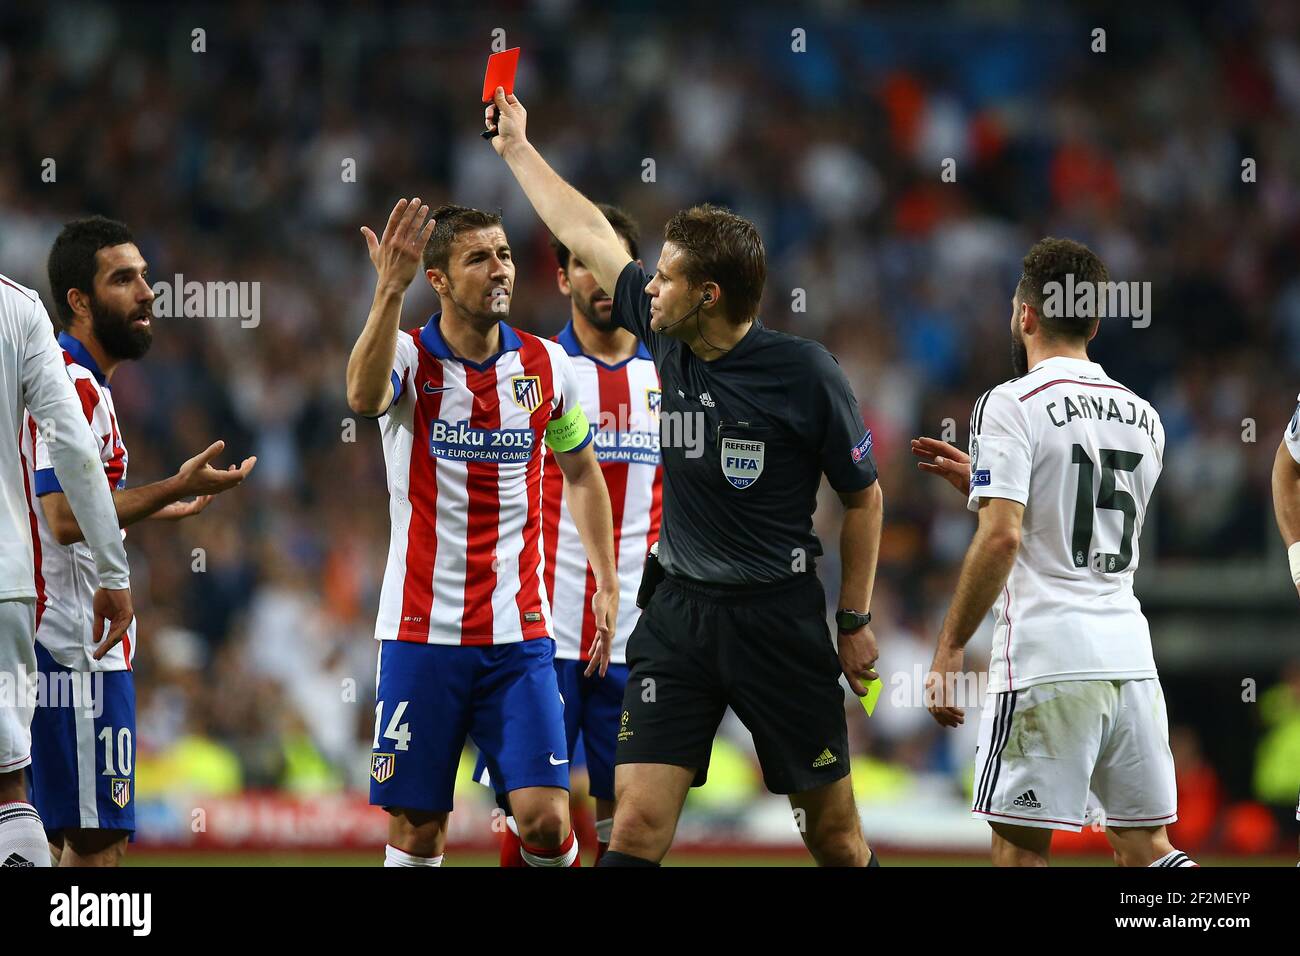 sadel Lao prop Referee Felix Brych shows a red card to Arda Turan of Atletico de Madrid  during the UEFA Champions League football match quarter final, 2 leg,  between Real Madrid and Atletico Madrid on